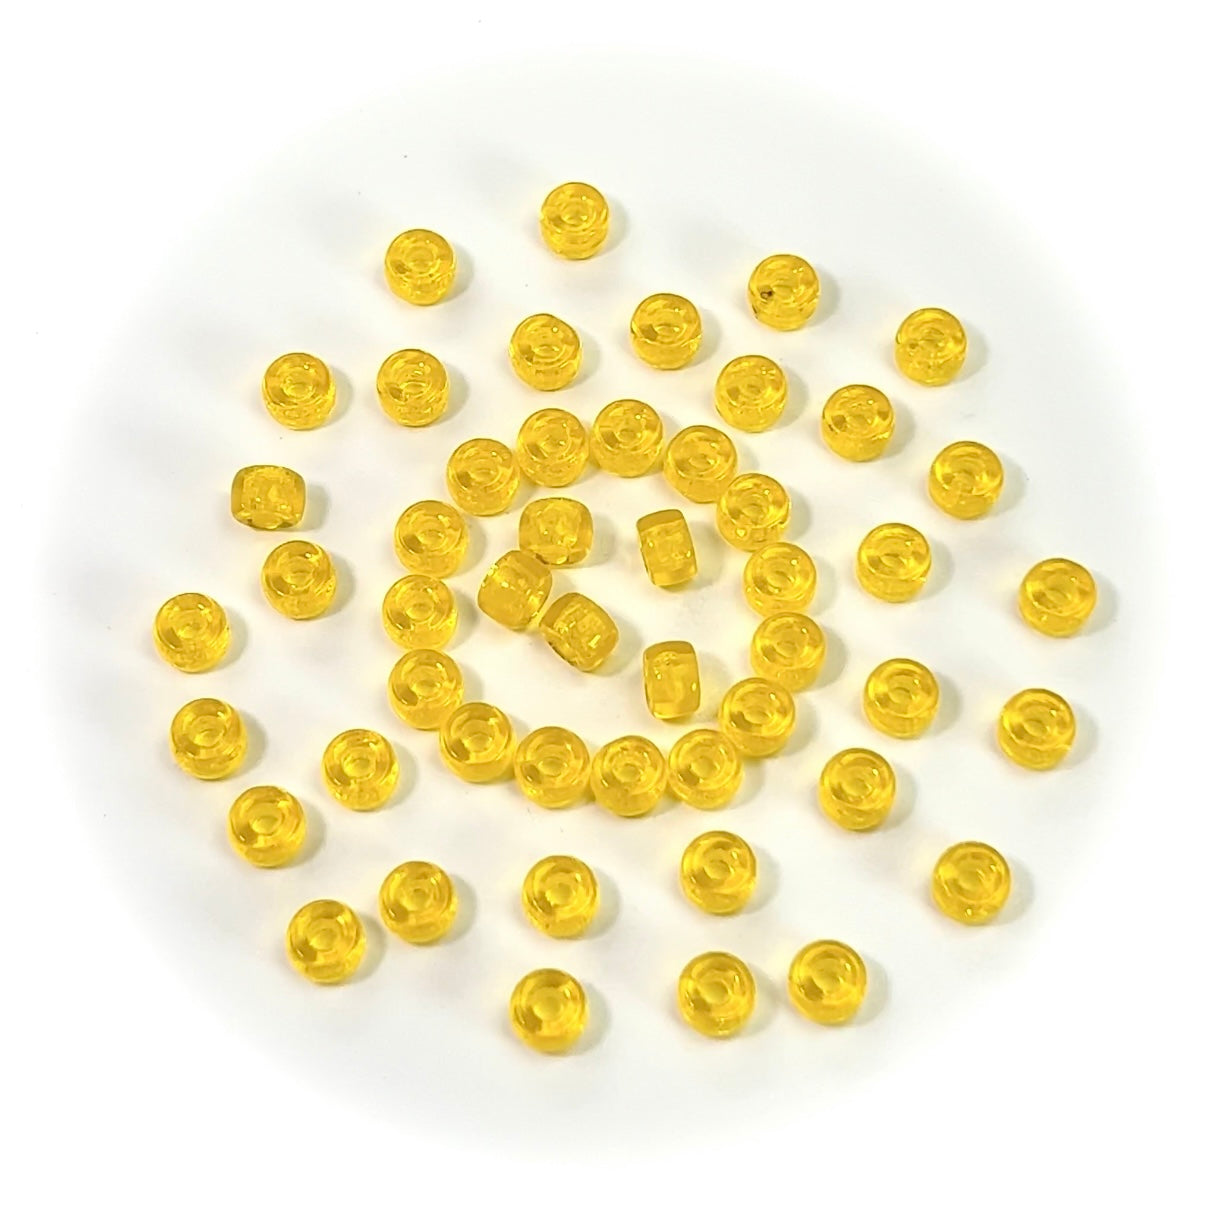 Czech Glass Druk Large Hole Beads in size 6mm, Yellow Citrine-Jonquil color, 50pcs, J081